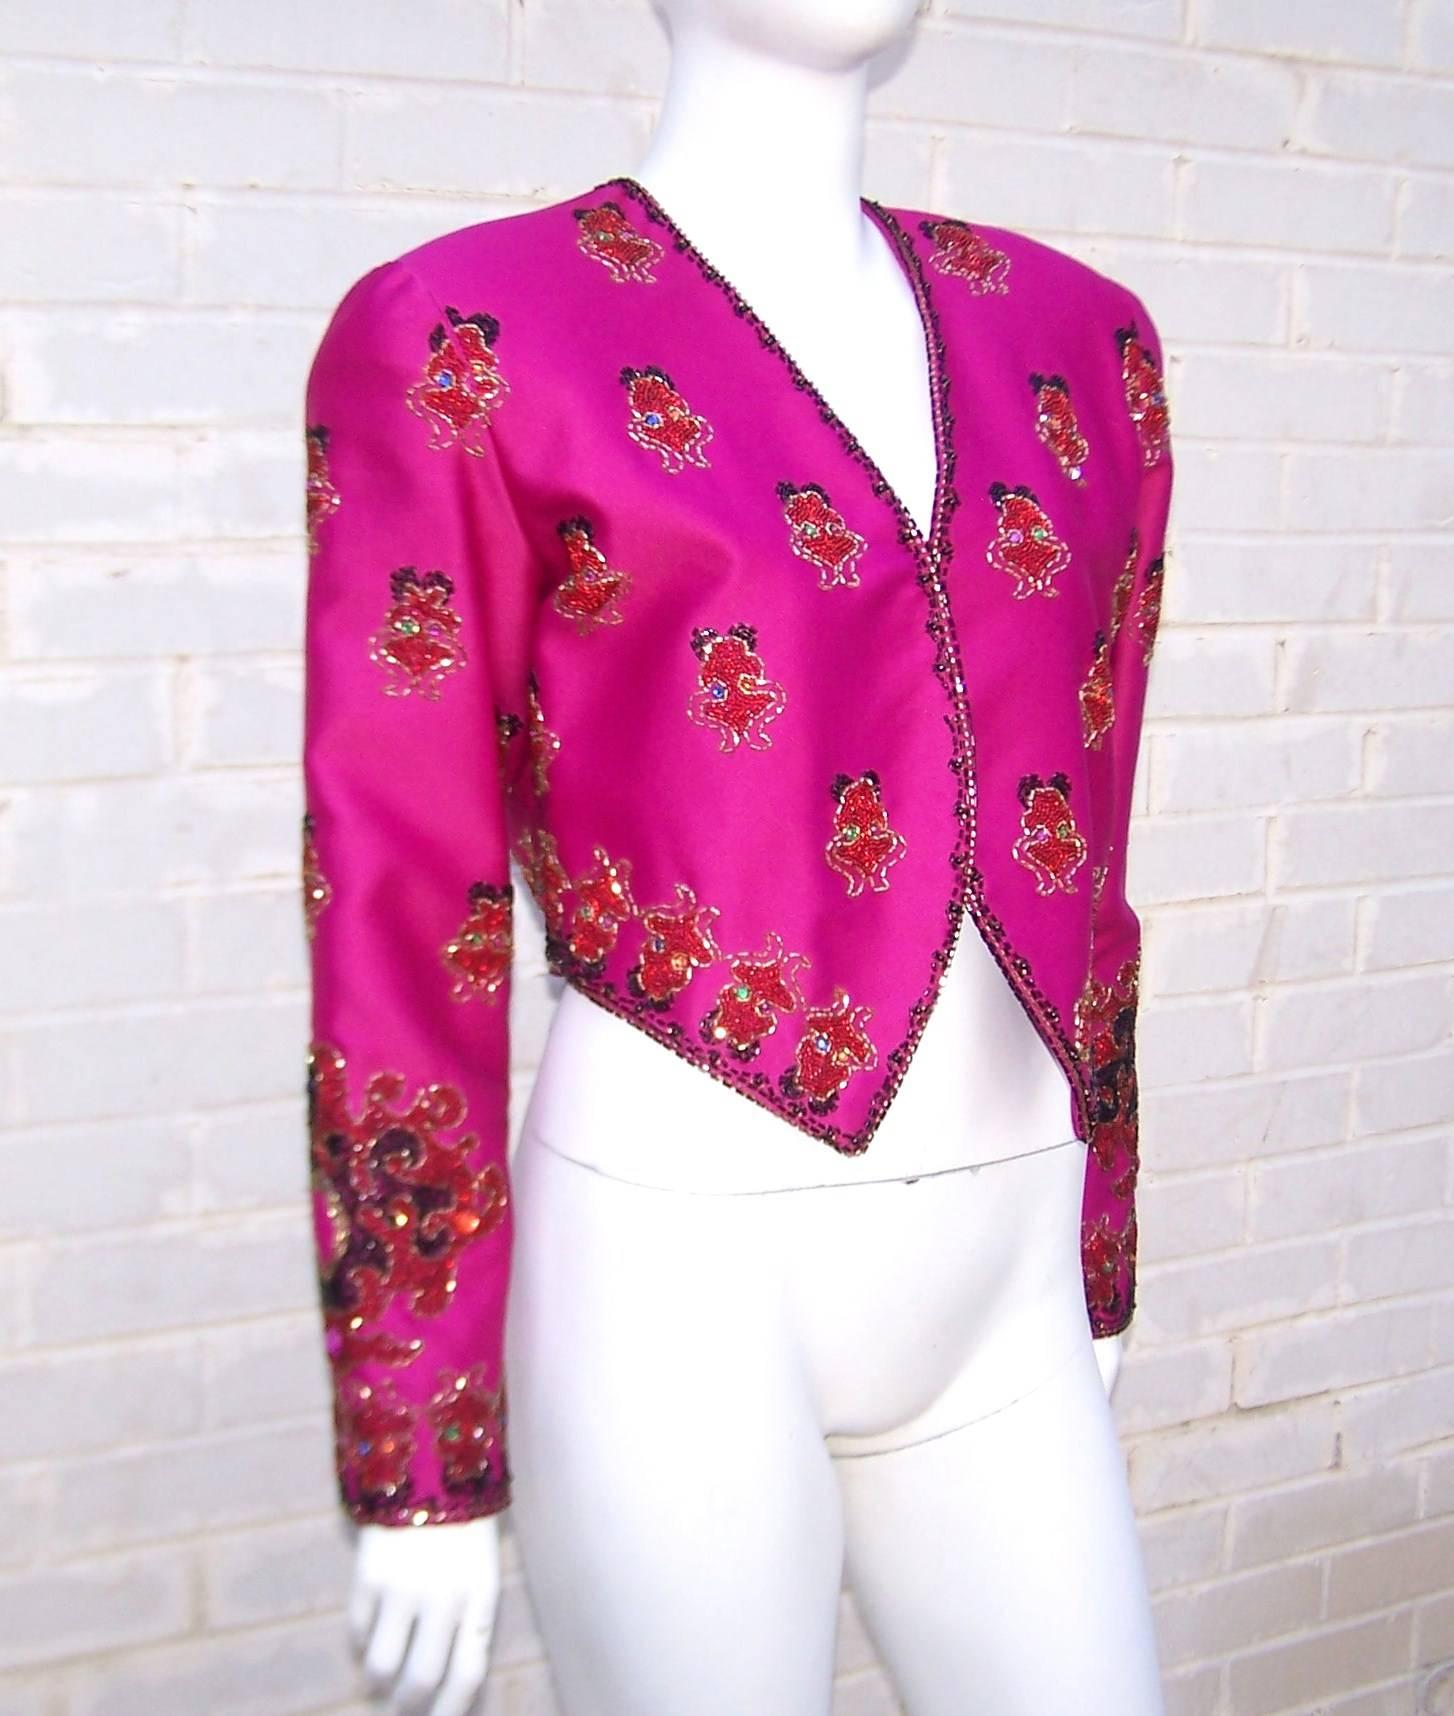 This jacket is unlabeled but it has all the great color combinations of a Christian LaCroix design.  The fuchsia satin is embellished with beaded color combinations of red, green, blue, orange, lilac and outlines in black laced with silver.  It